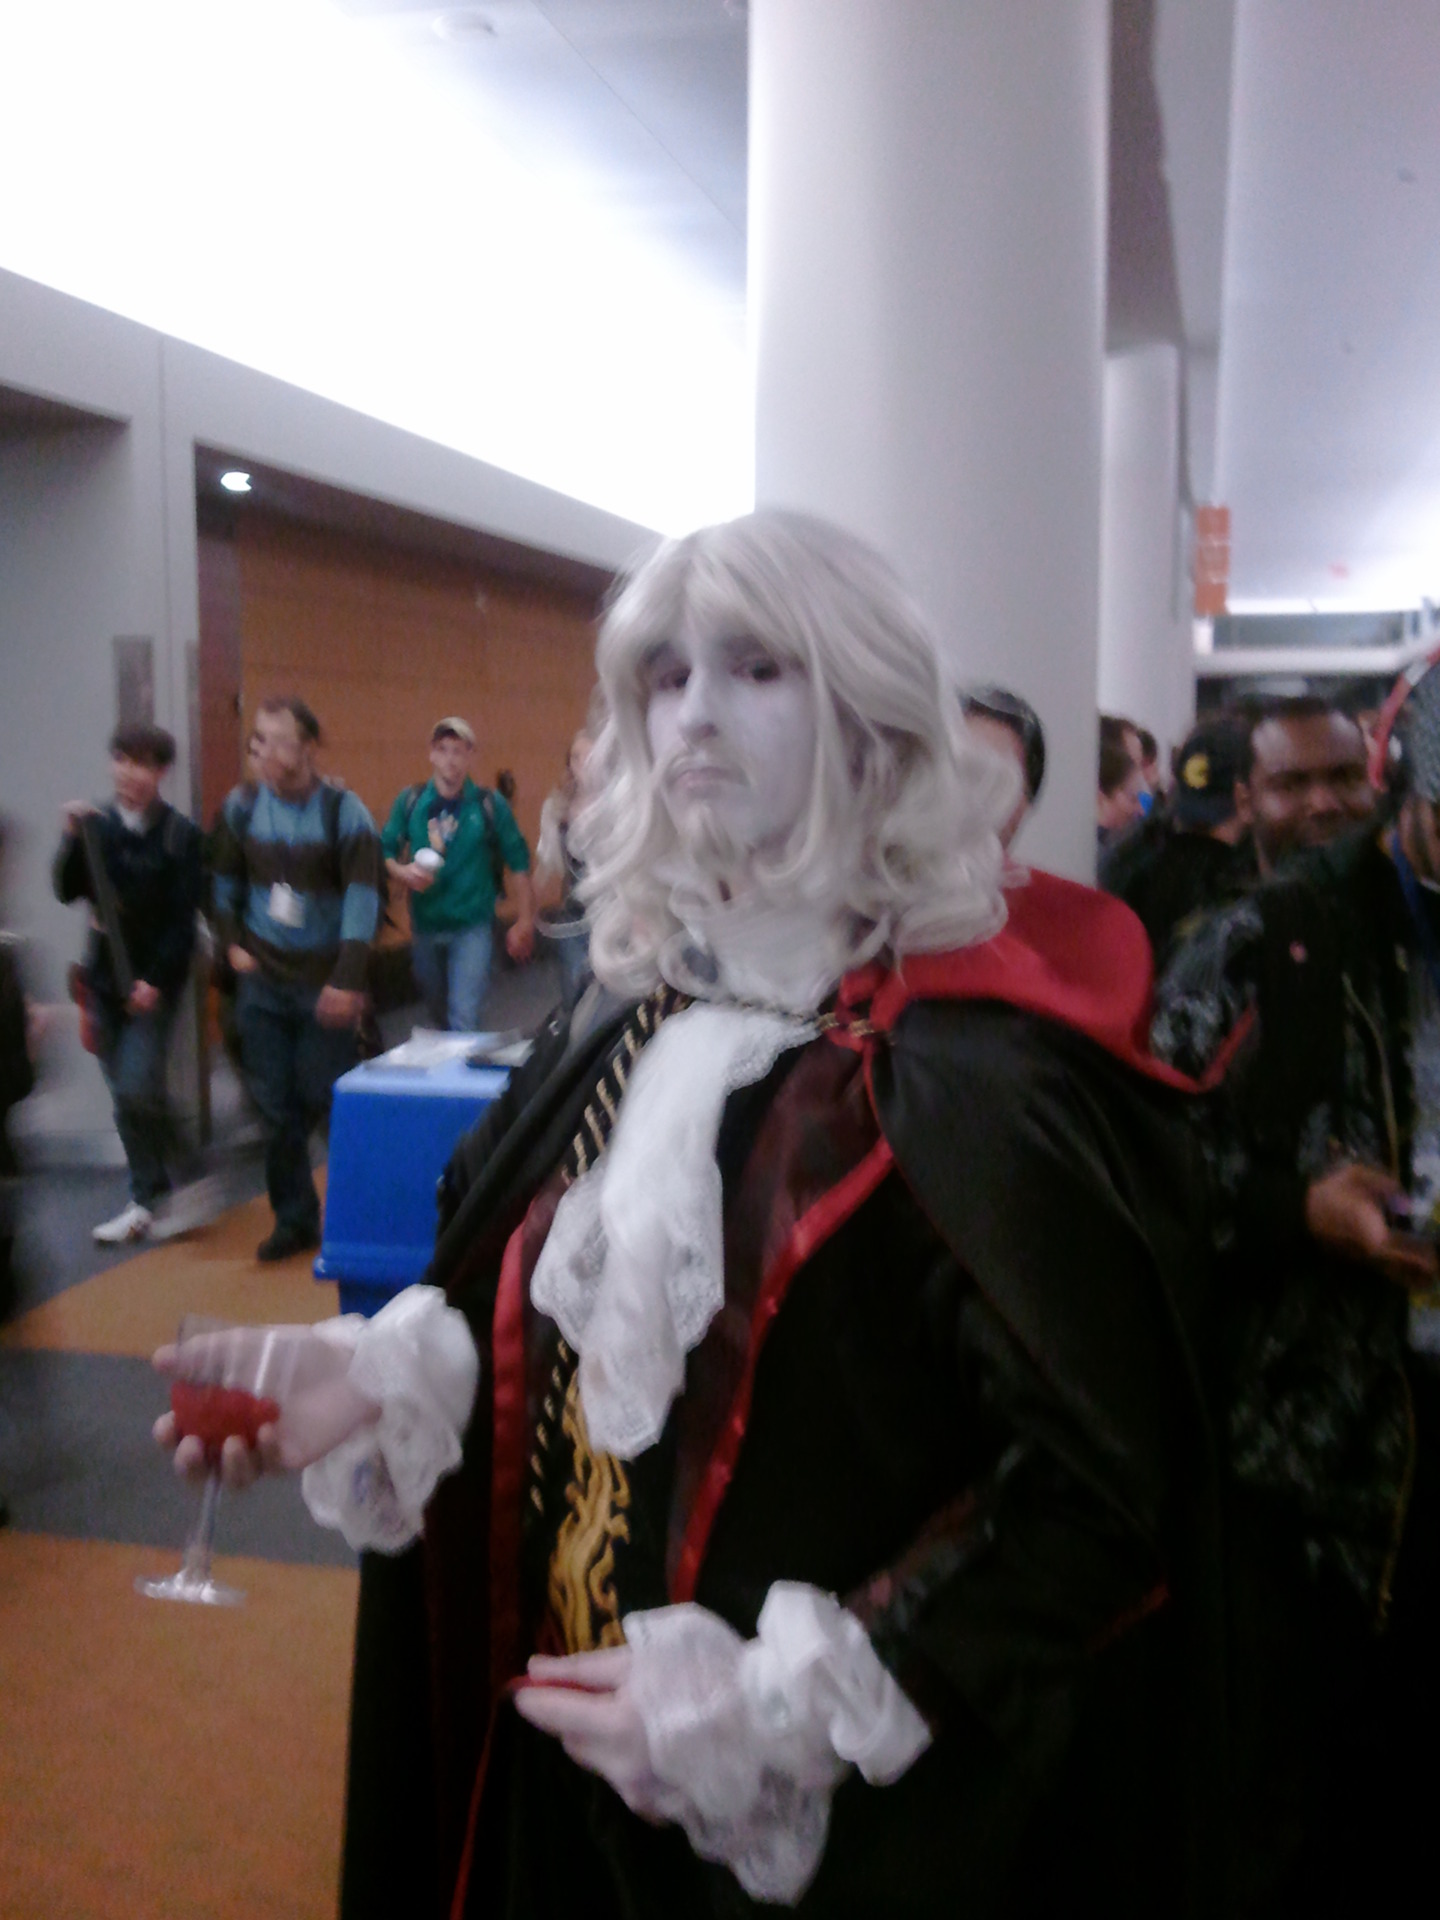  Dracula from Symphony of the Night and I Wanna Be the Guy